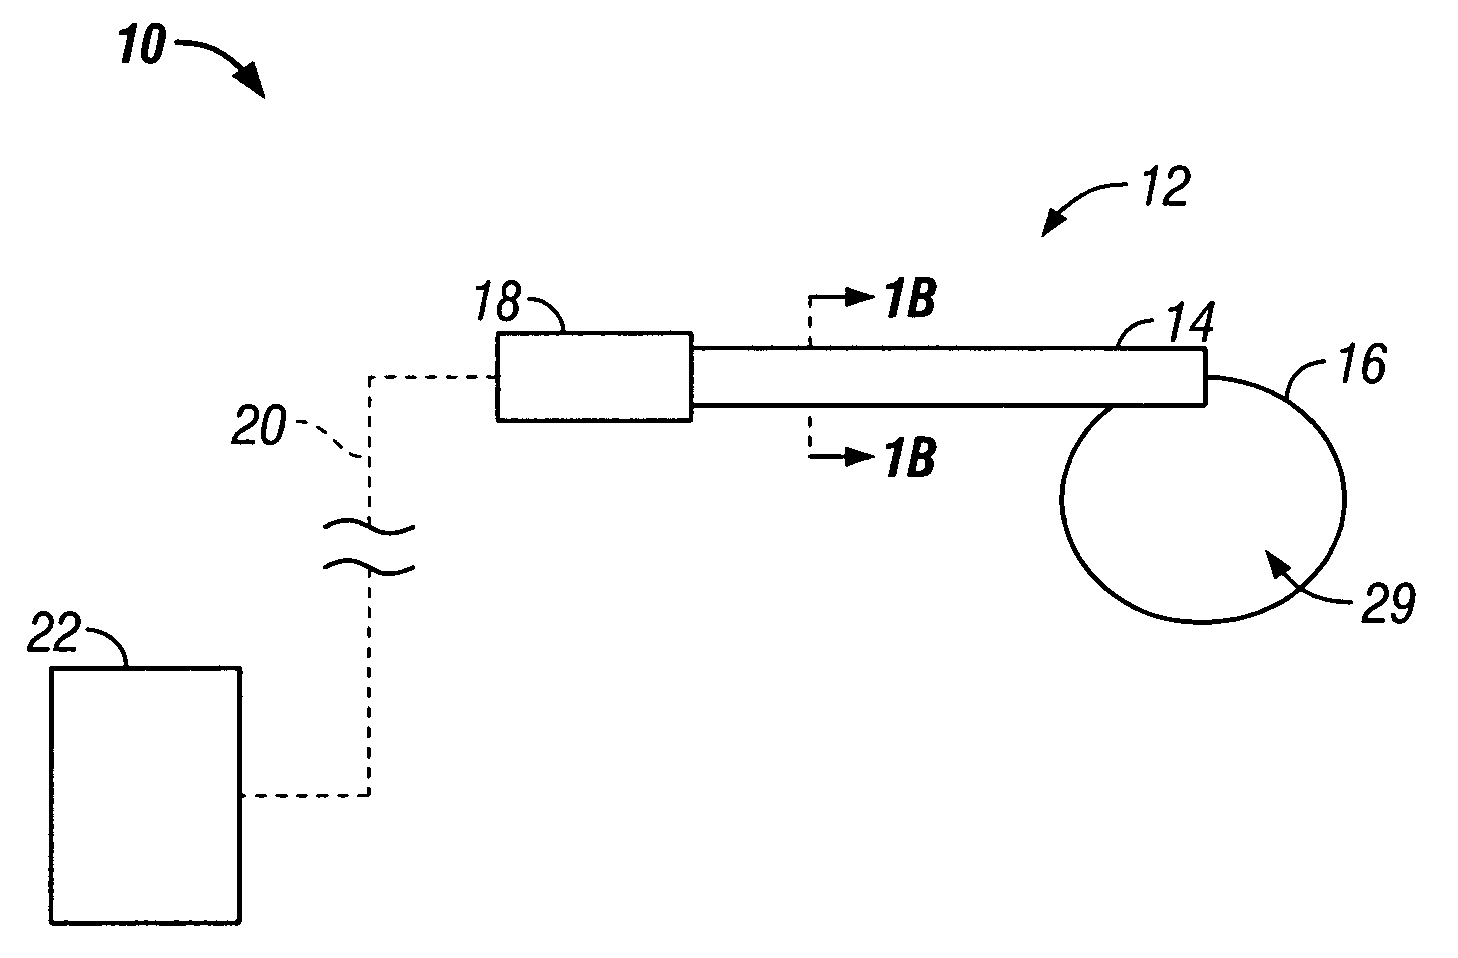 Microwave antenna having a curved configuration